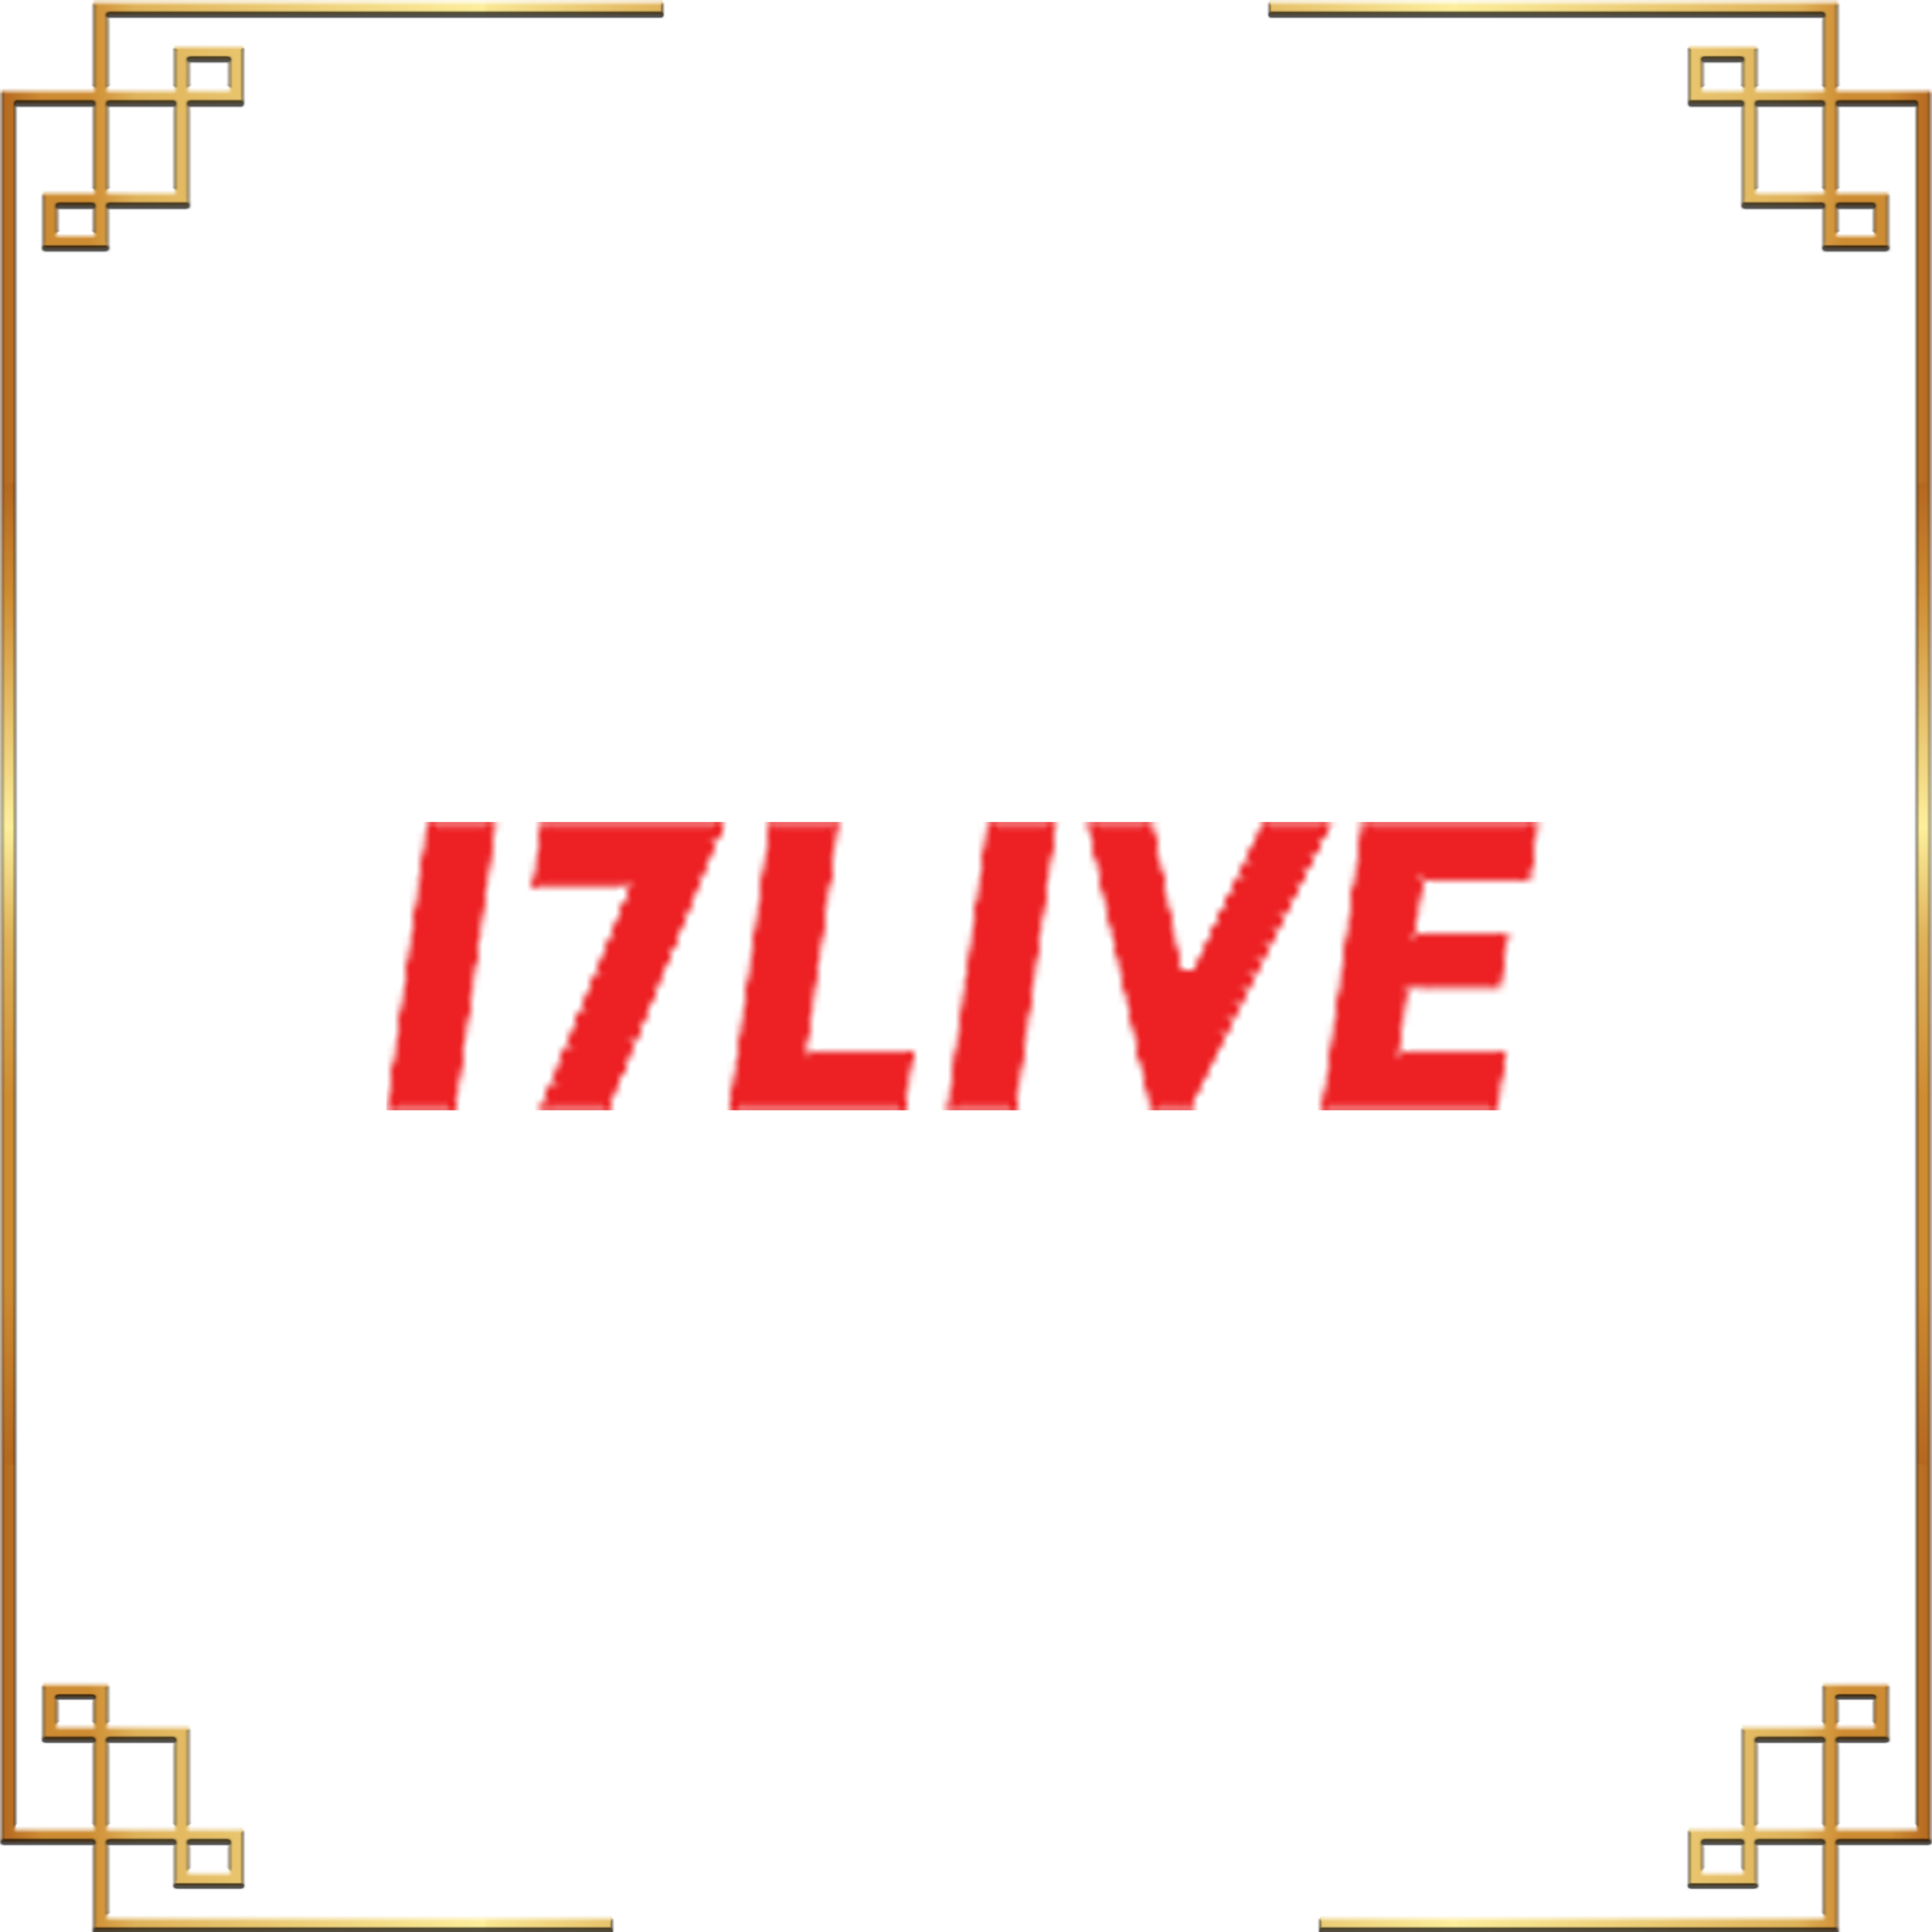 17LIVE.png